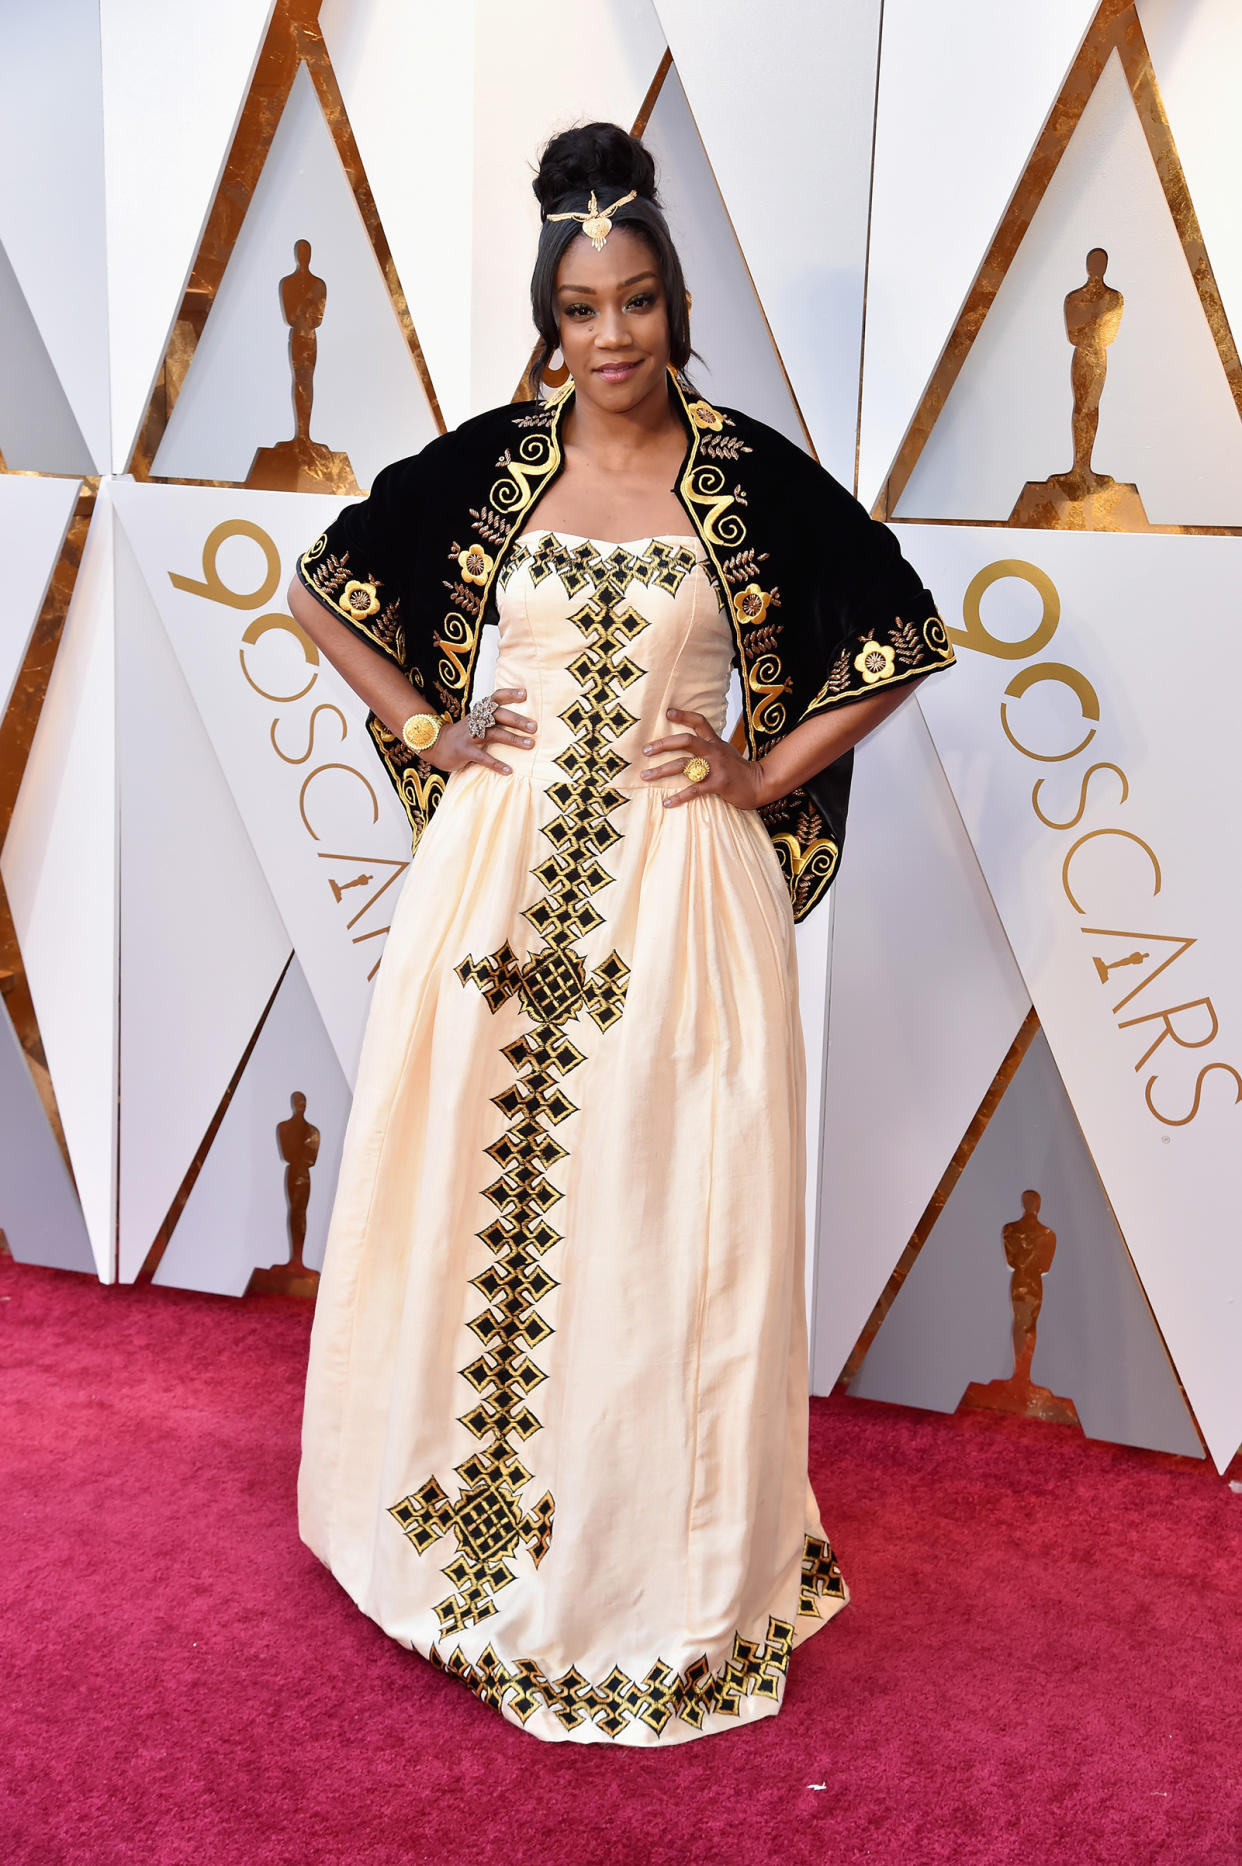 Tiffany Haddish attends the 90th Annual Academy Awards at Hollywood & Highland Center on March 4.